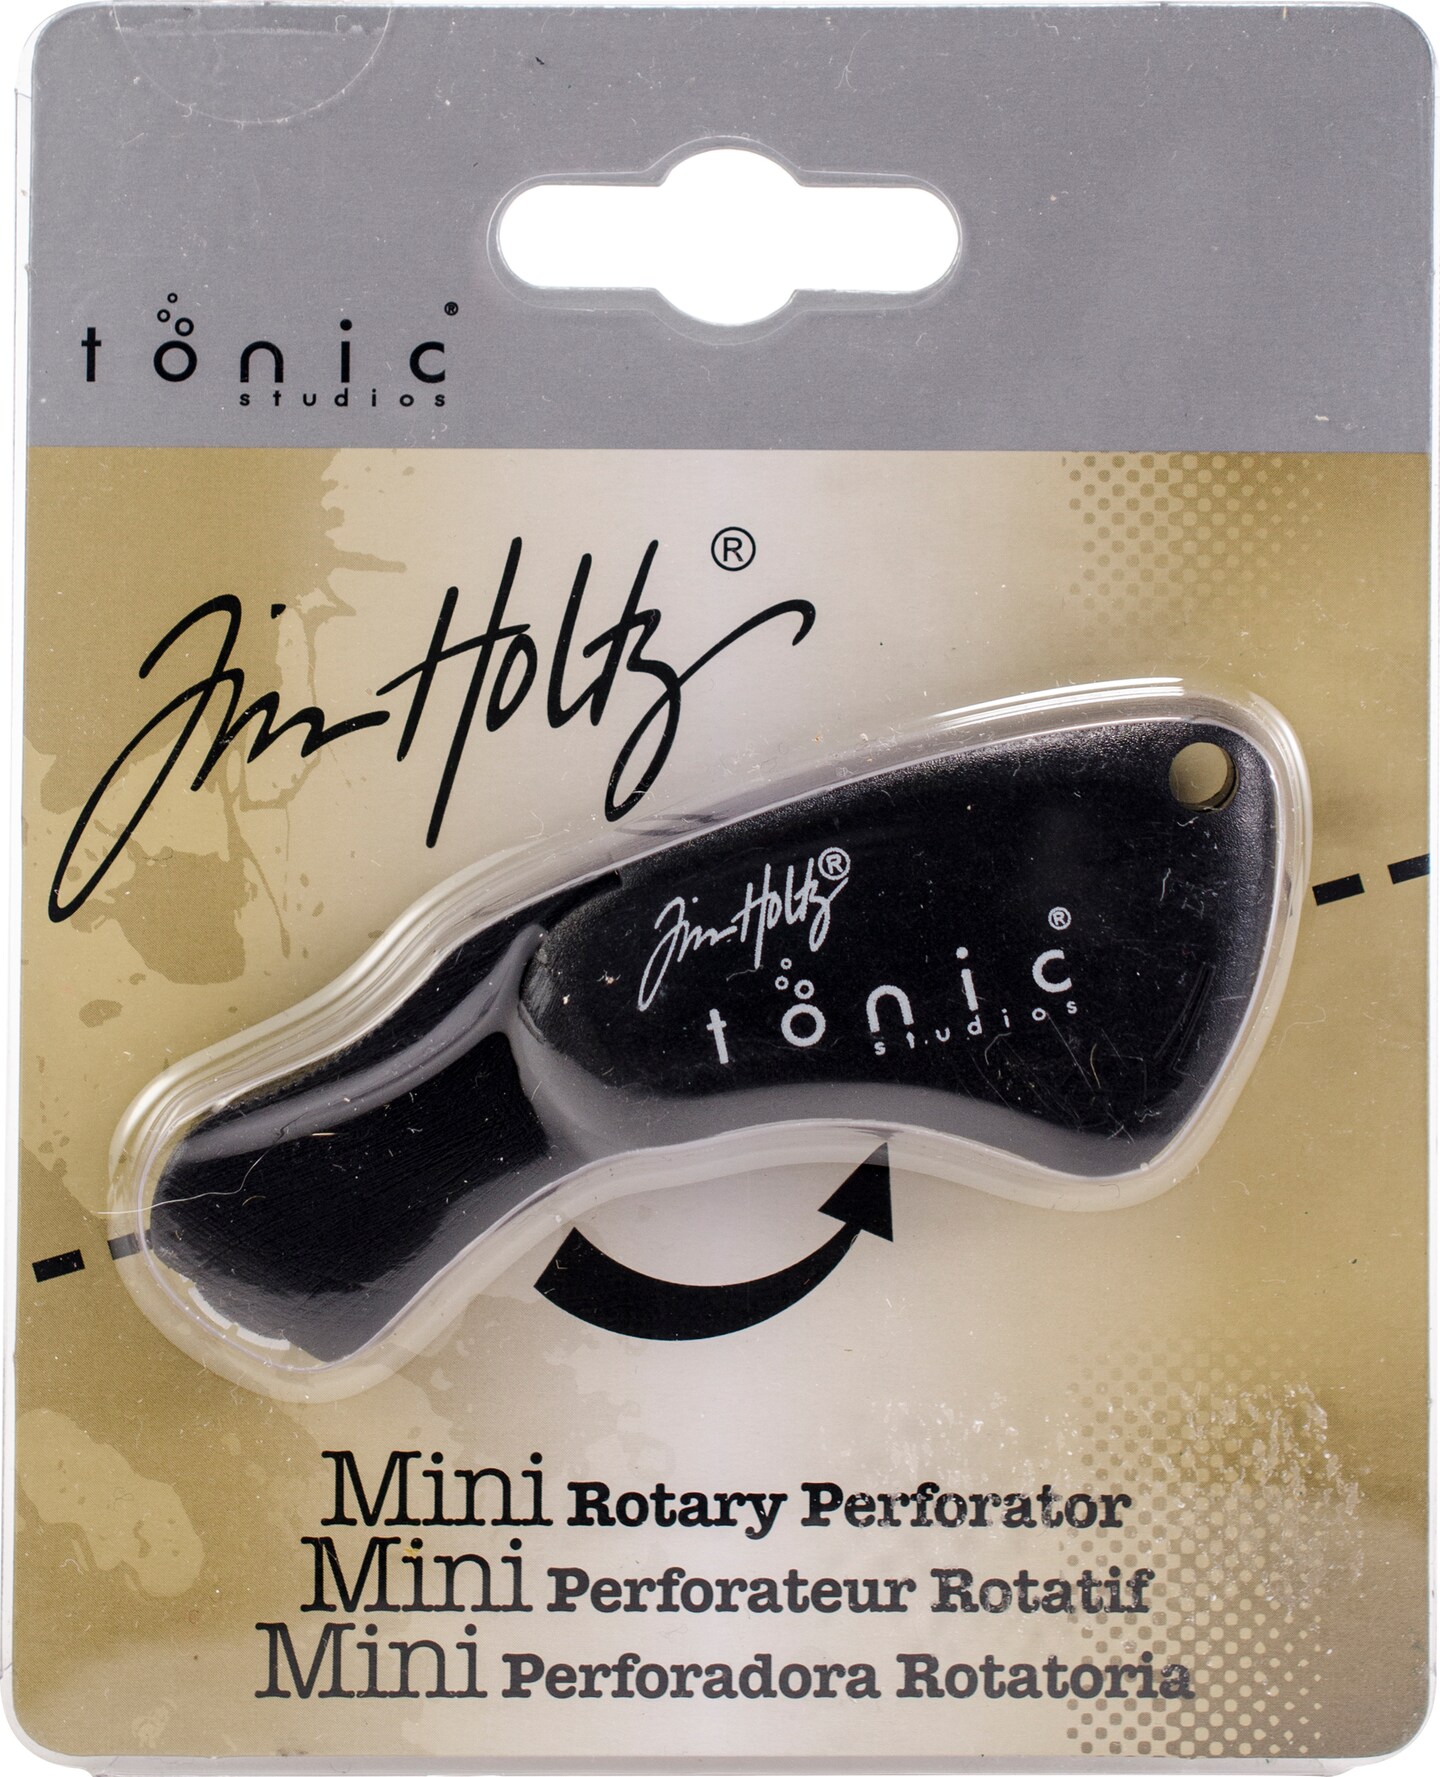 Tim Holtz Mini Rotary Perforator - 18mm Pinking Blade for Cutting  Perforated Paper - Rolling Craft Tool for Cardstock and Scrapbooks - Small  & Foldable